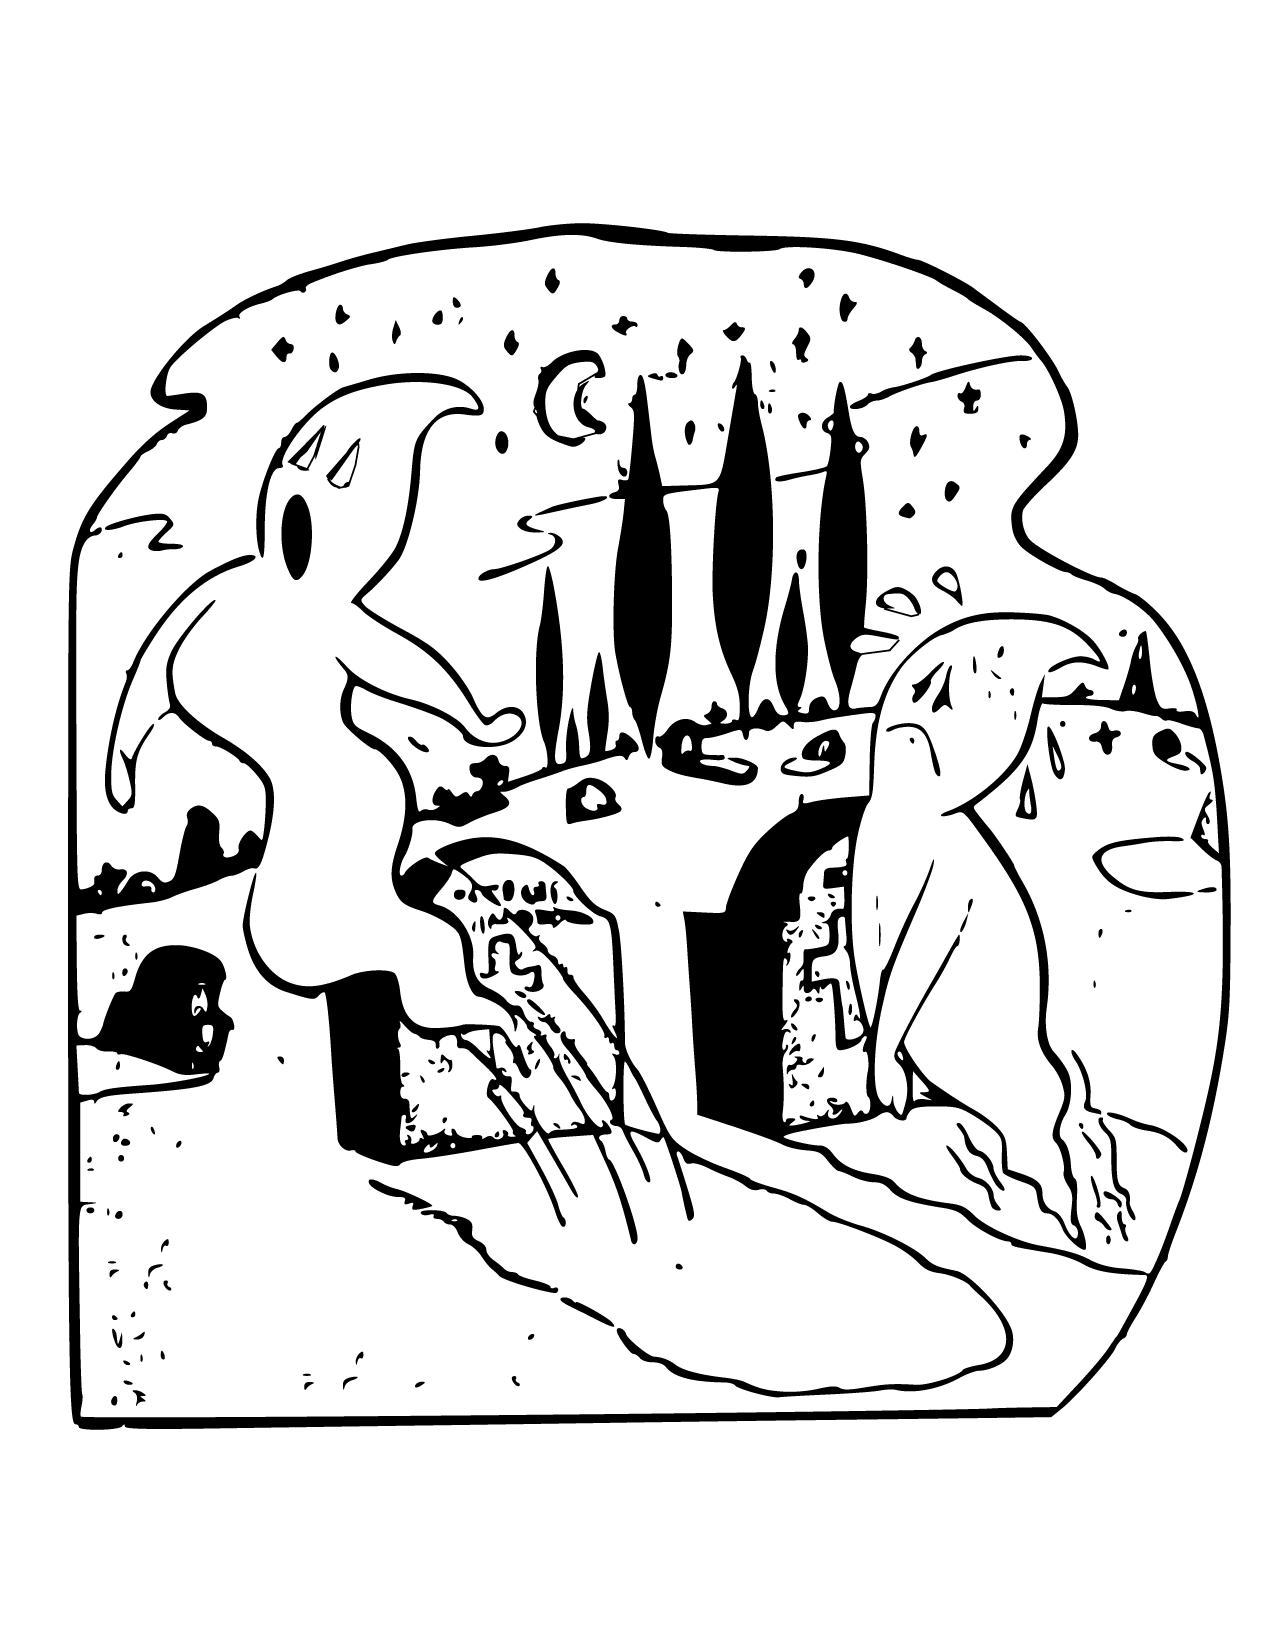 Ghosts In A Graveyard Coloring Page